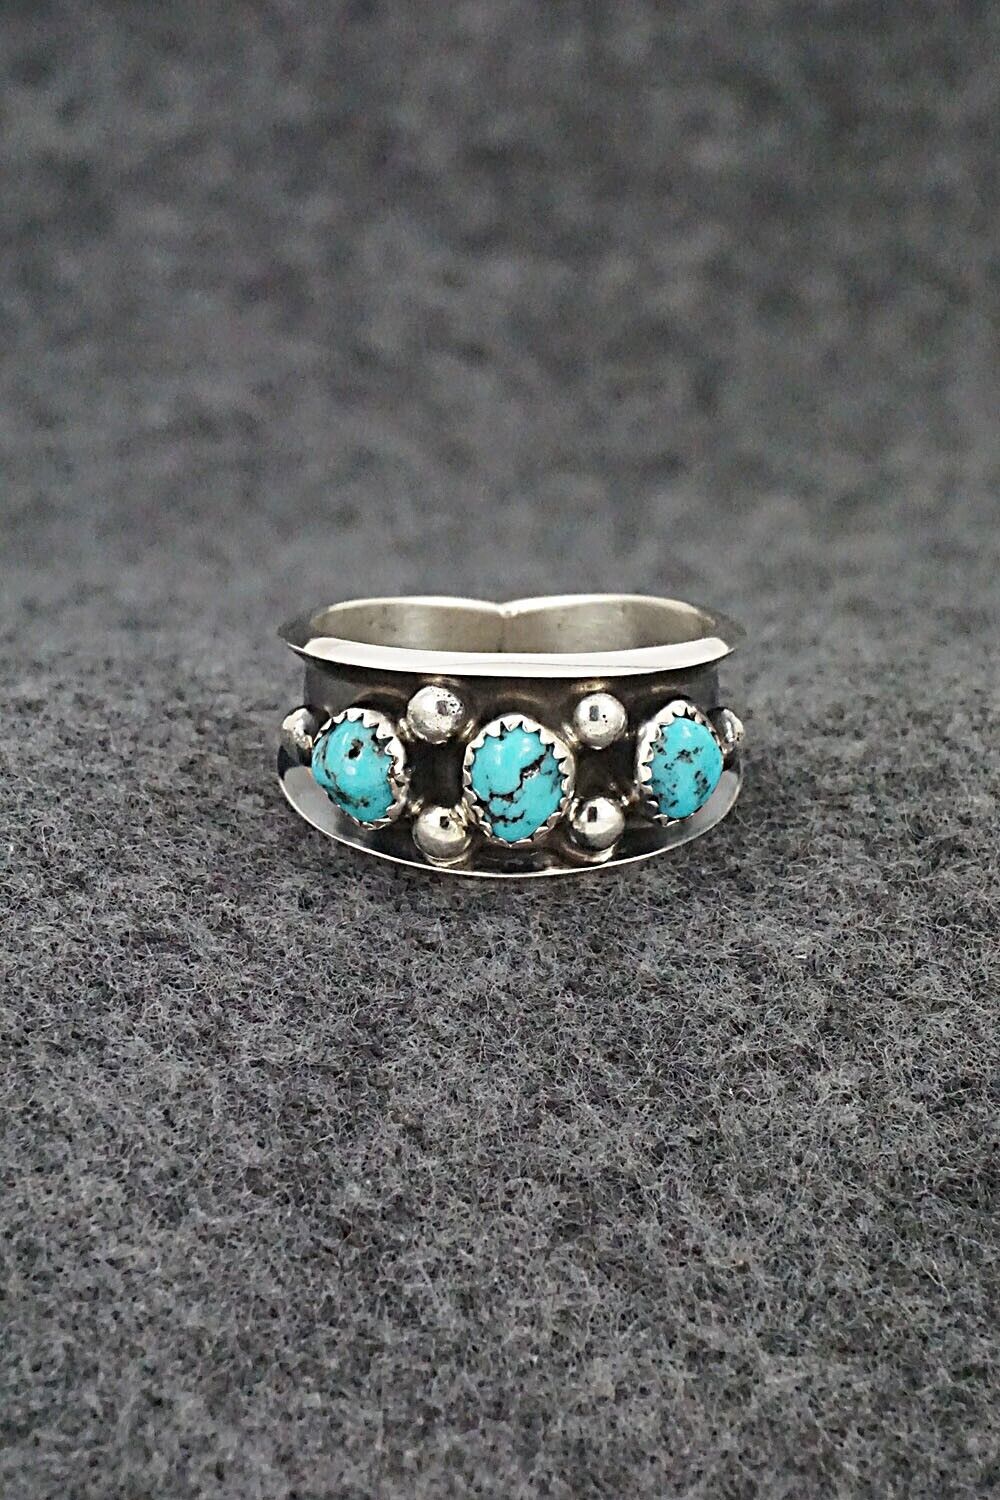 Turquoise & Sterling Silver Ring - Paul Largo - Size 8.75